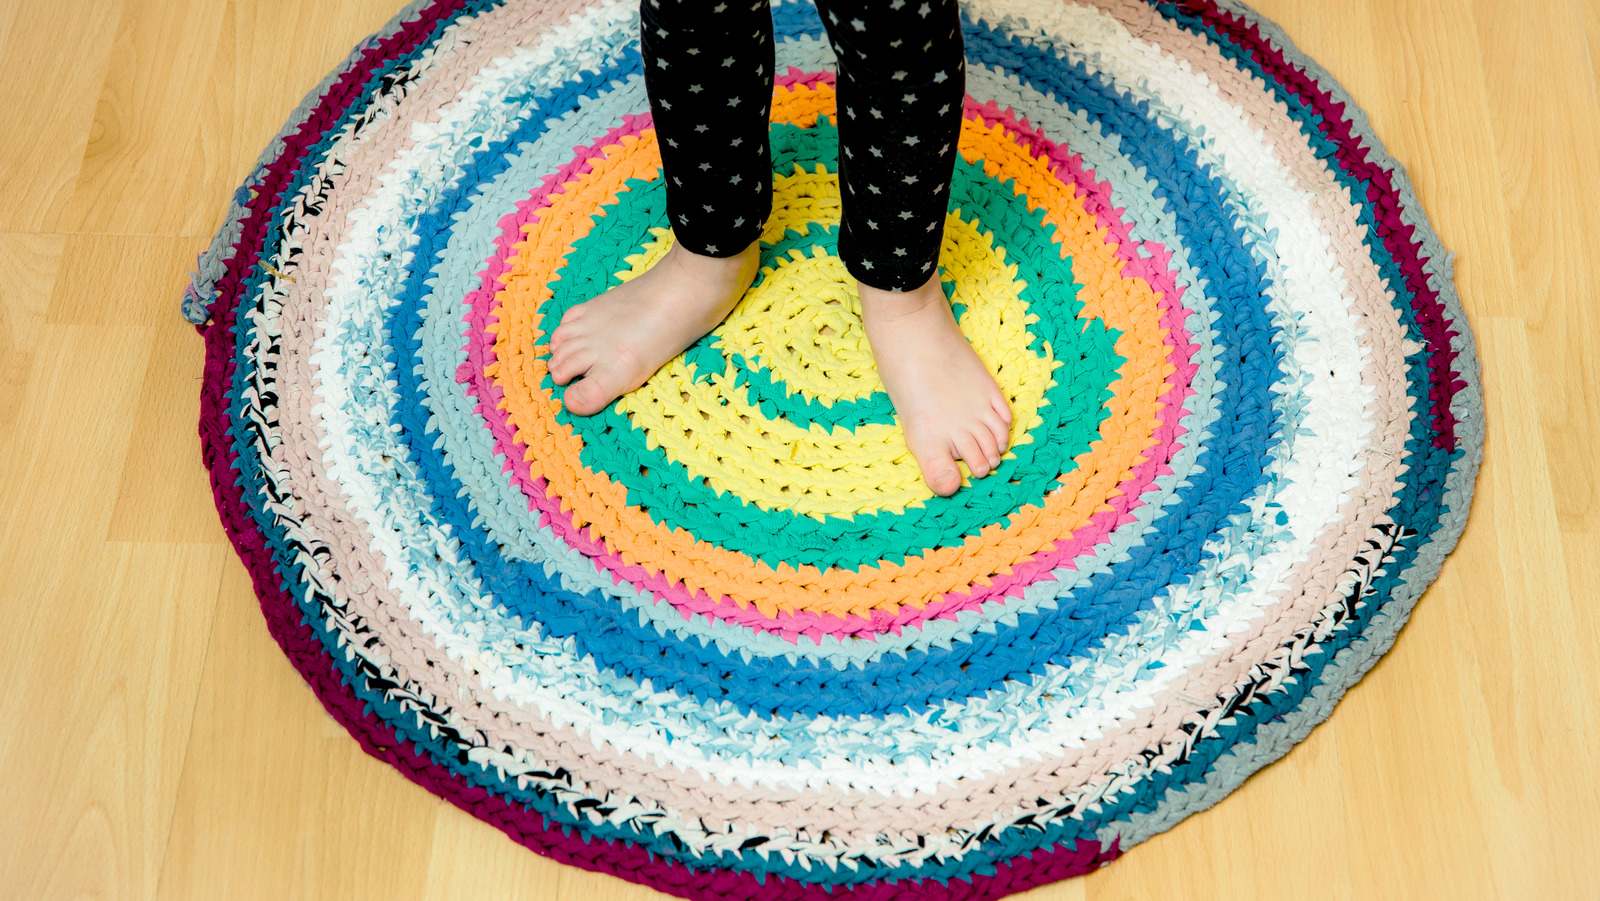 How To Make A DIY Rag Rug - Using Old Bedding